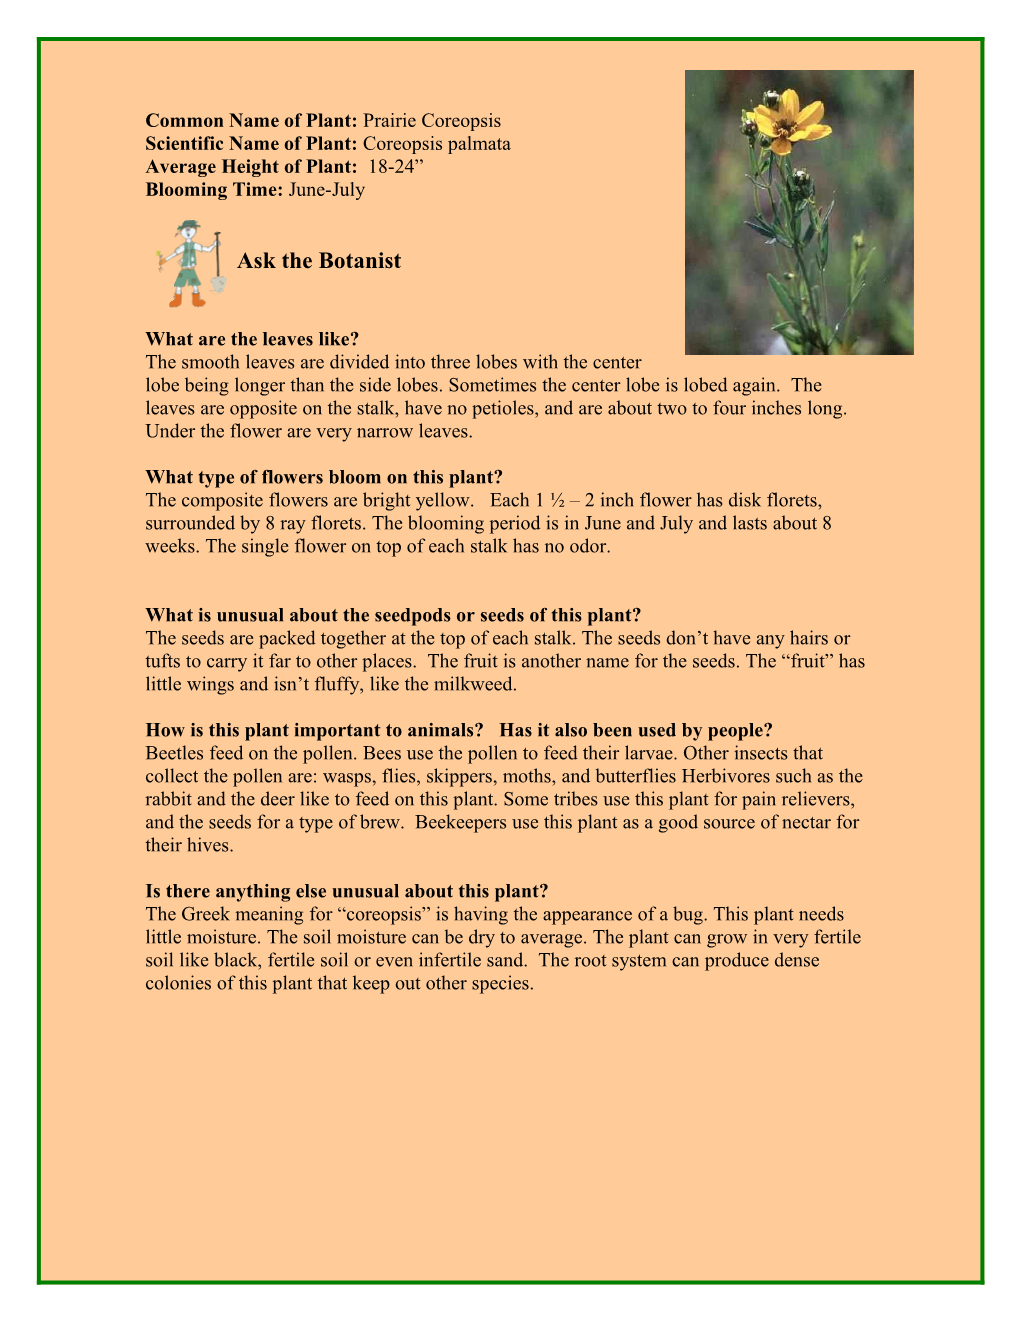 Friess Lake School Nature Guide s2